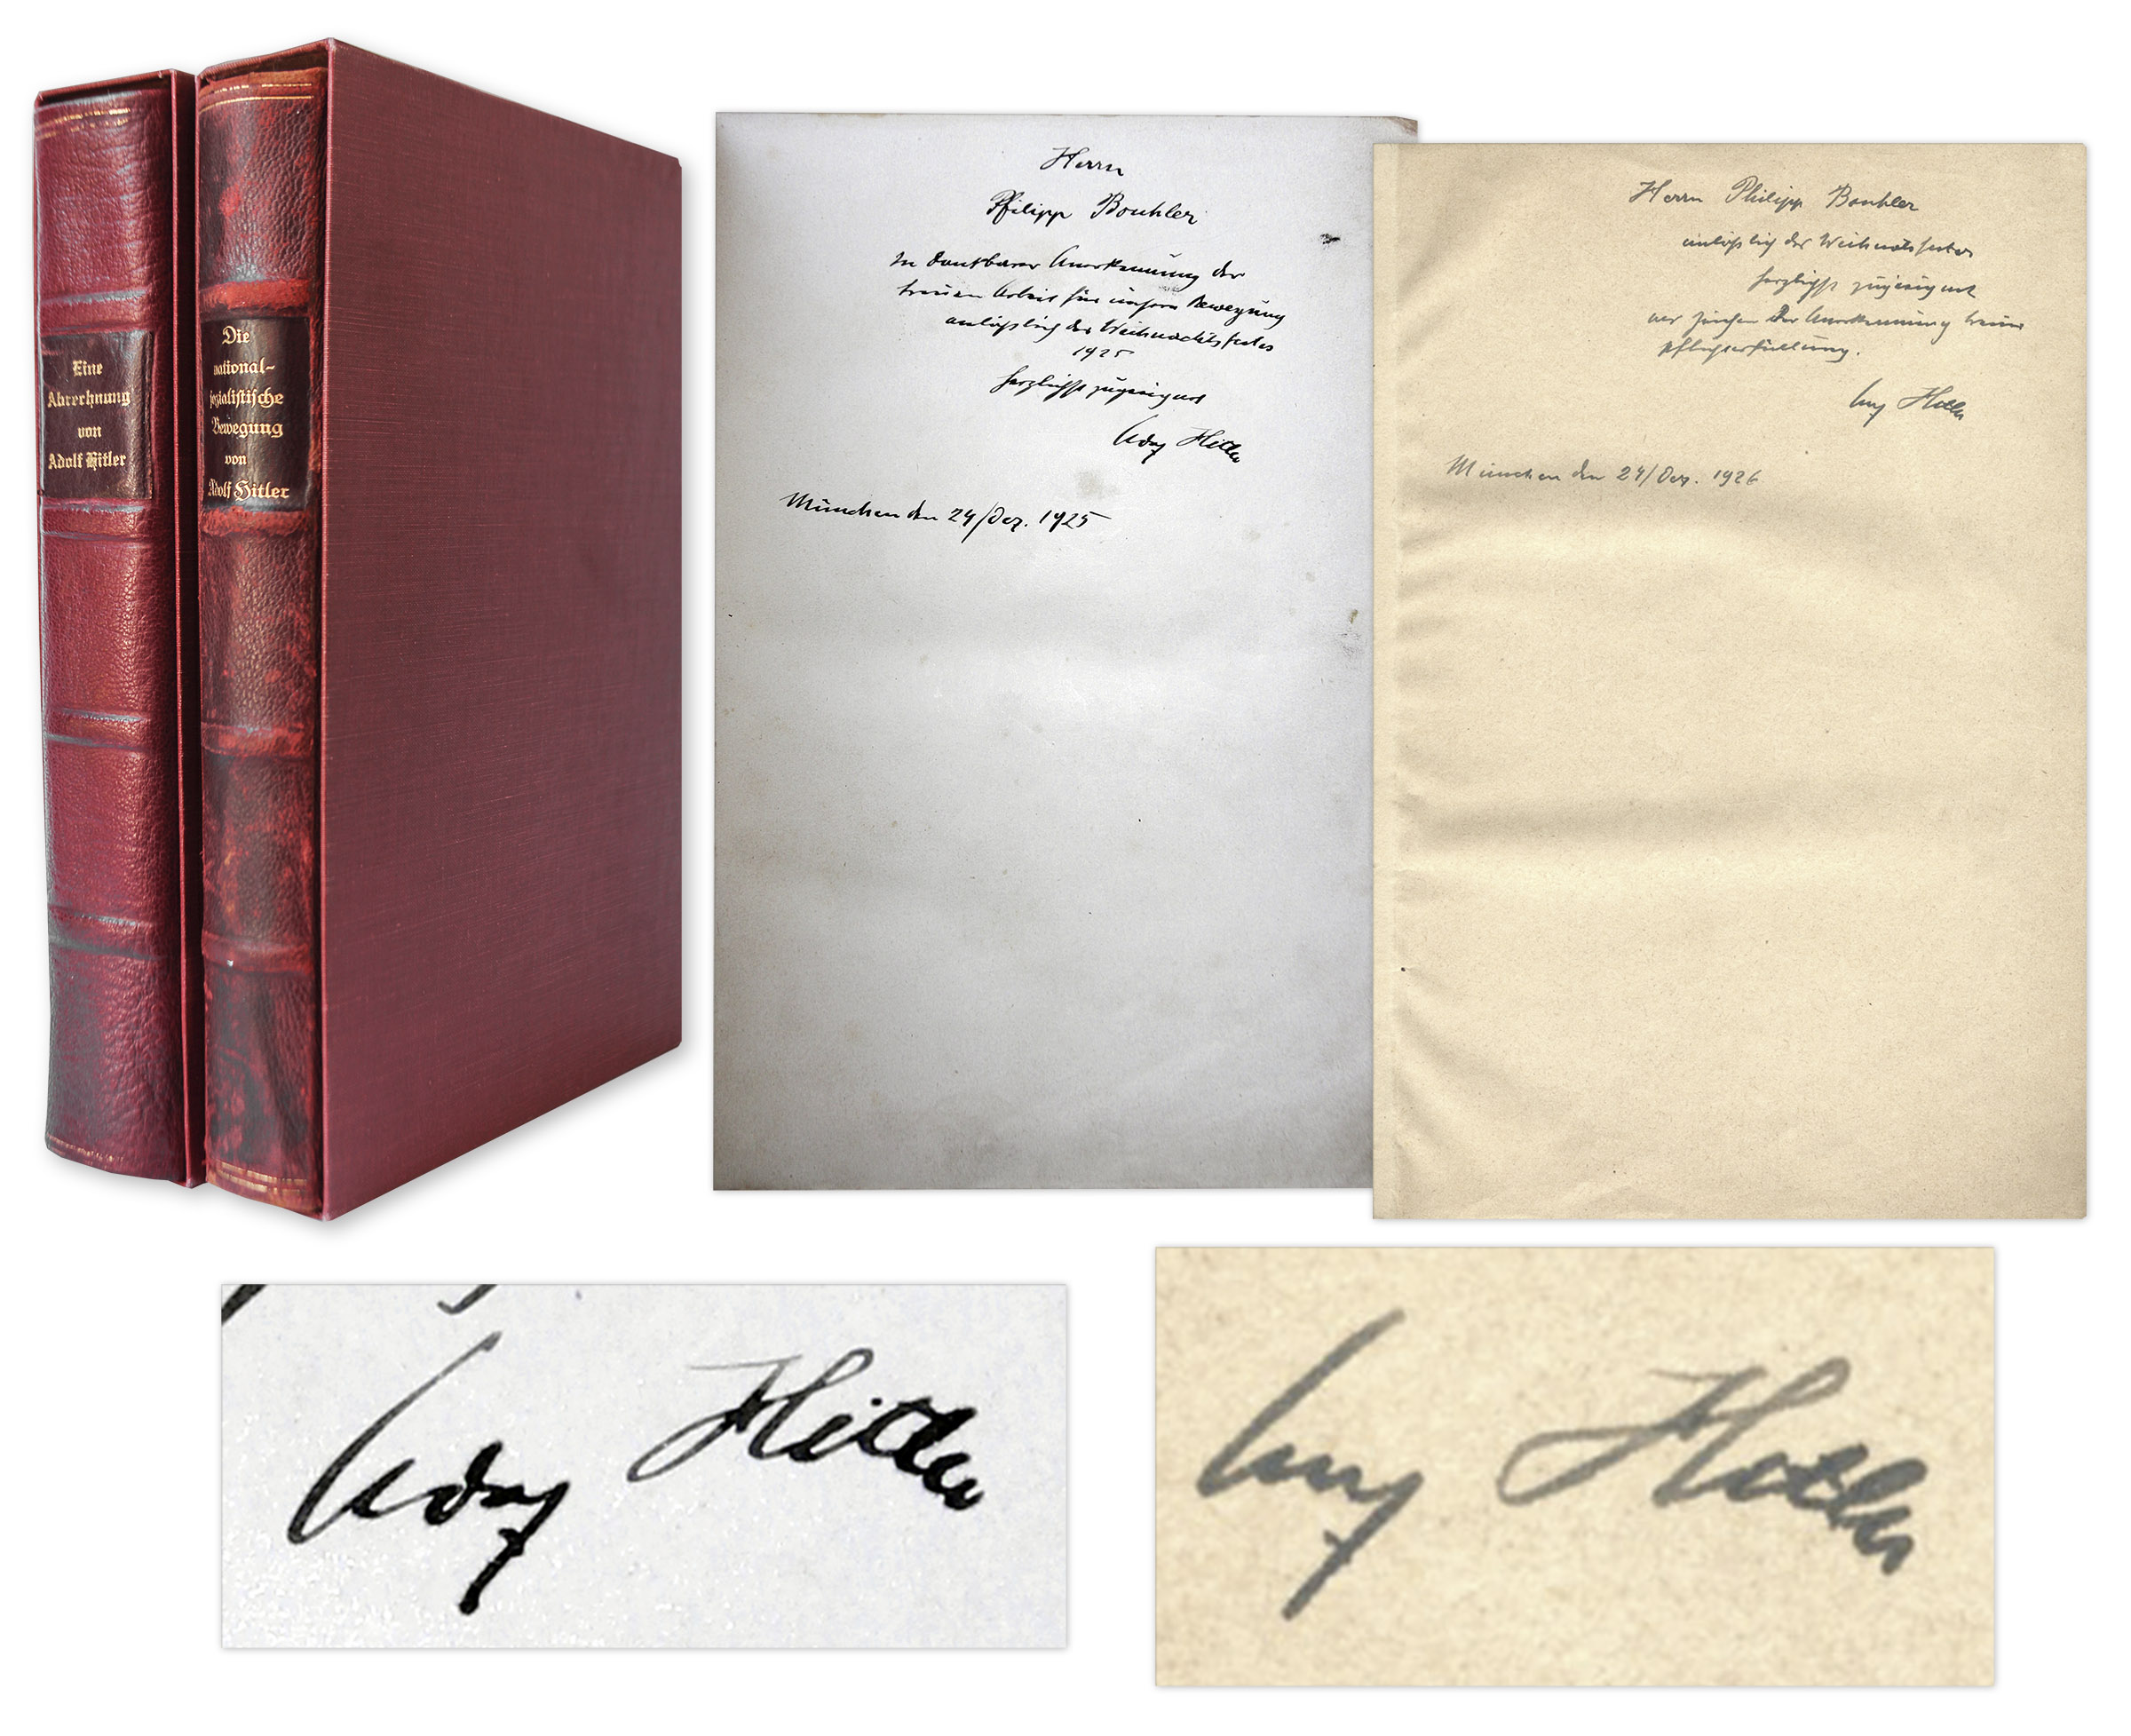 Adolf Hitler Autograph Adolf Hitler Signed First Editions of ''Mein Kampf'' -- Both Volumes Signed by Hitler in 1925 and 1926, Inscribed to Philipp Bouhler, Nazi #12 -- ''...your loyal work for our movement...''